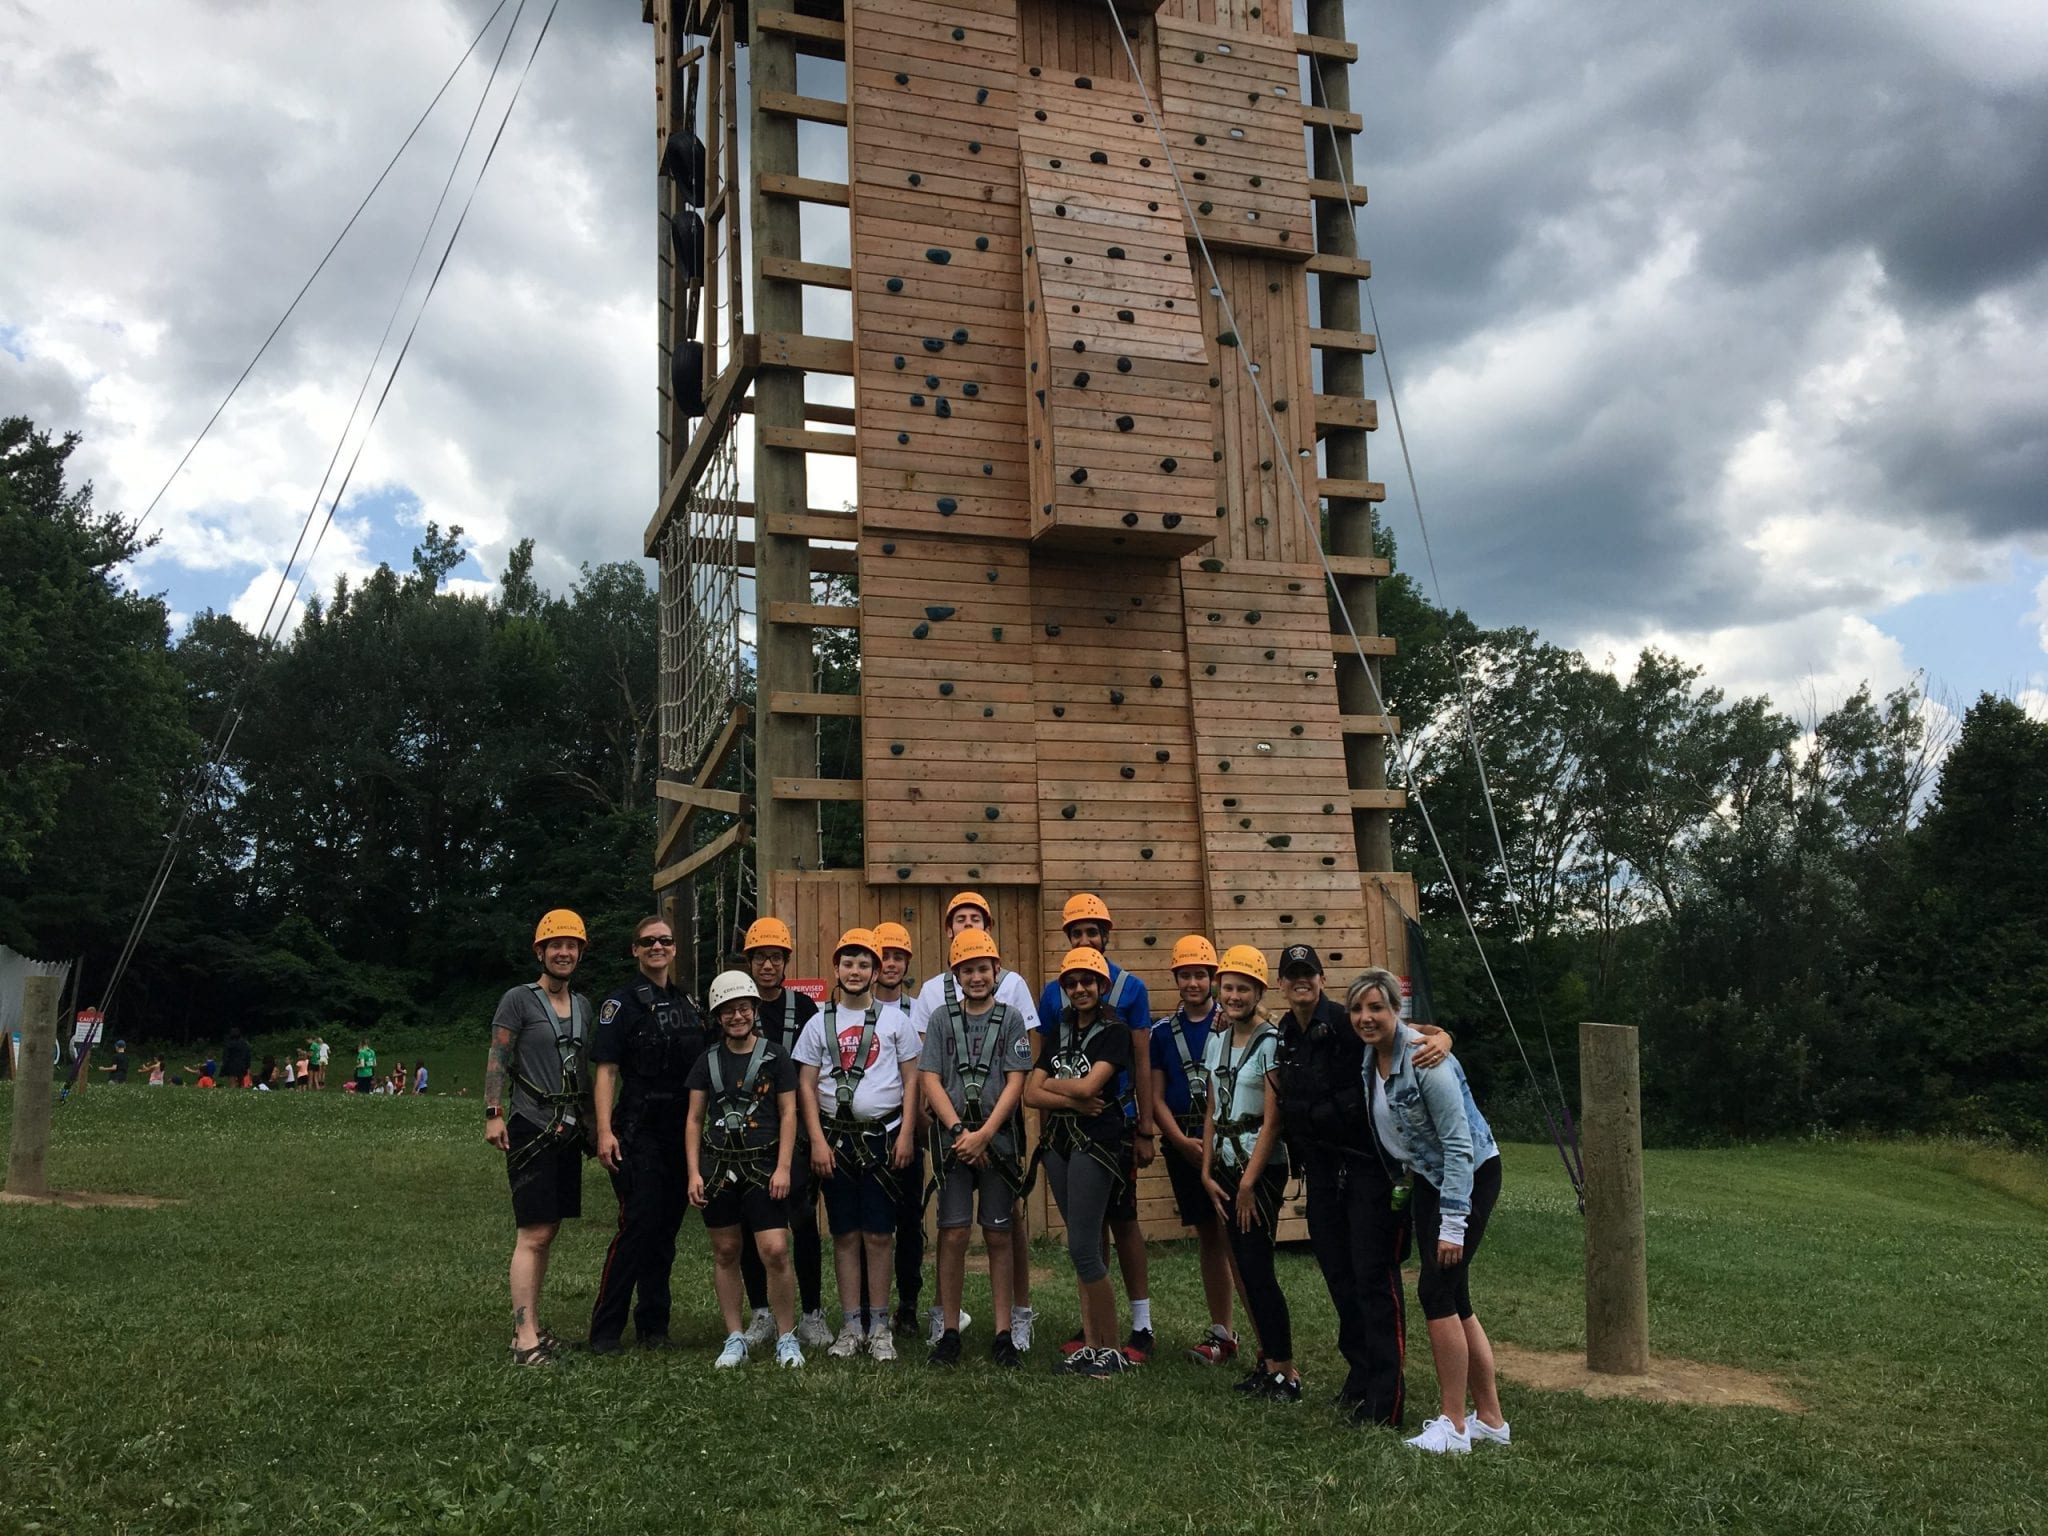 M.Y. Camp - Group Shot at High Ropes Course